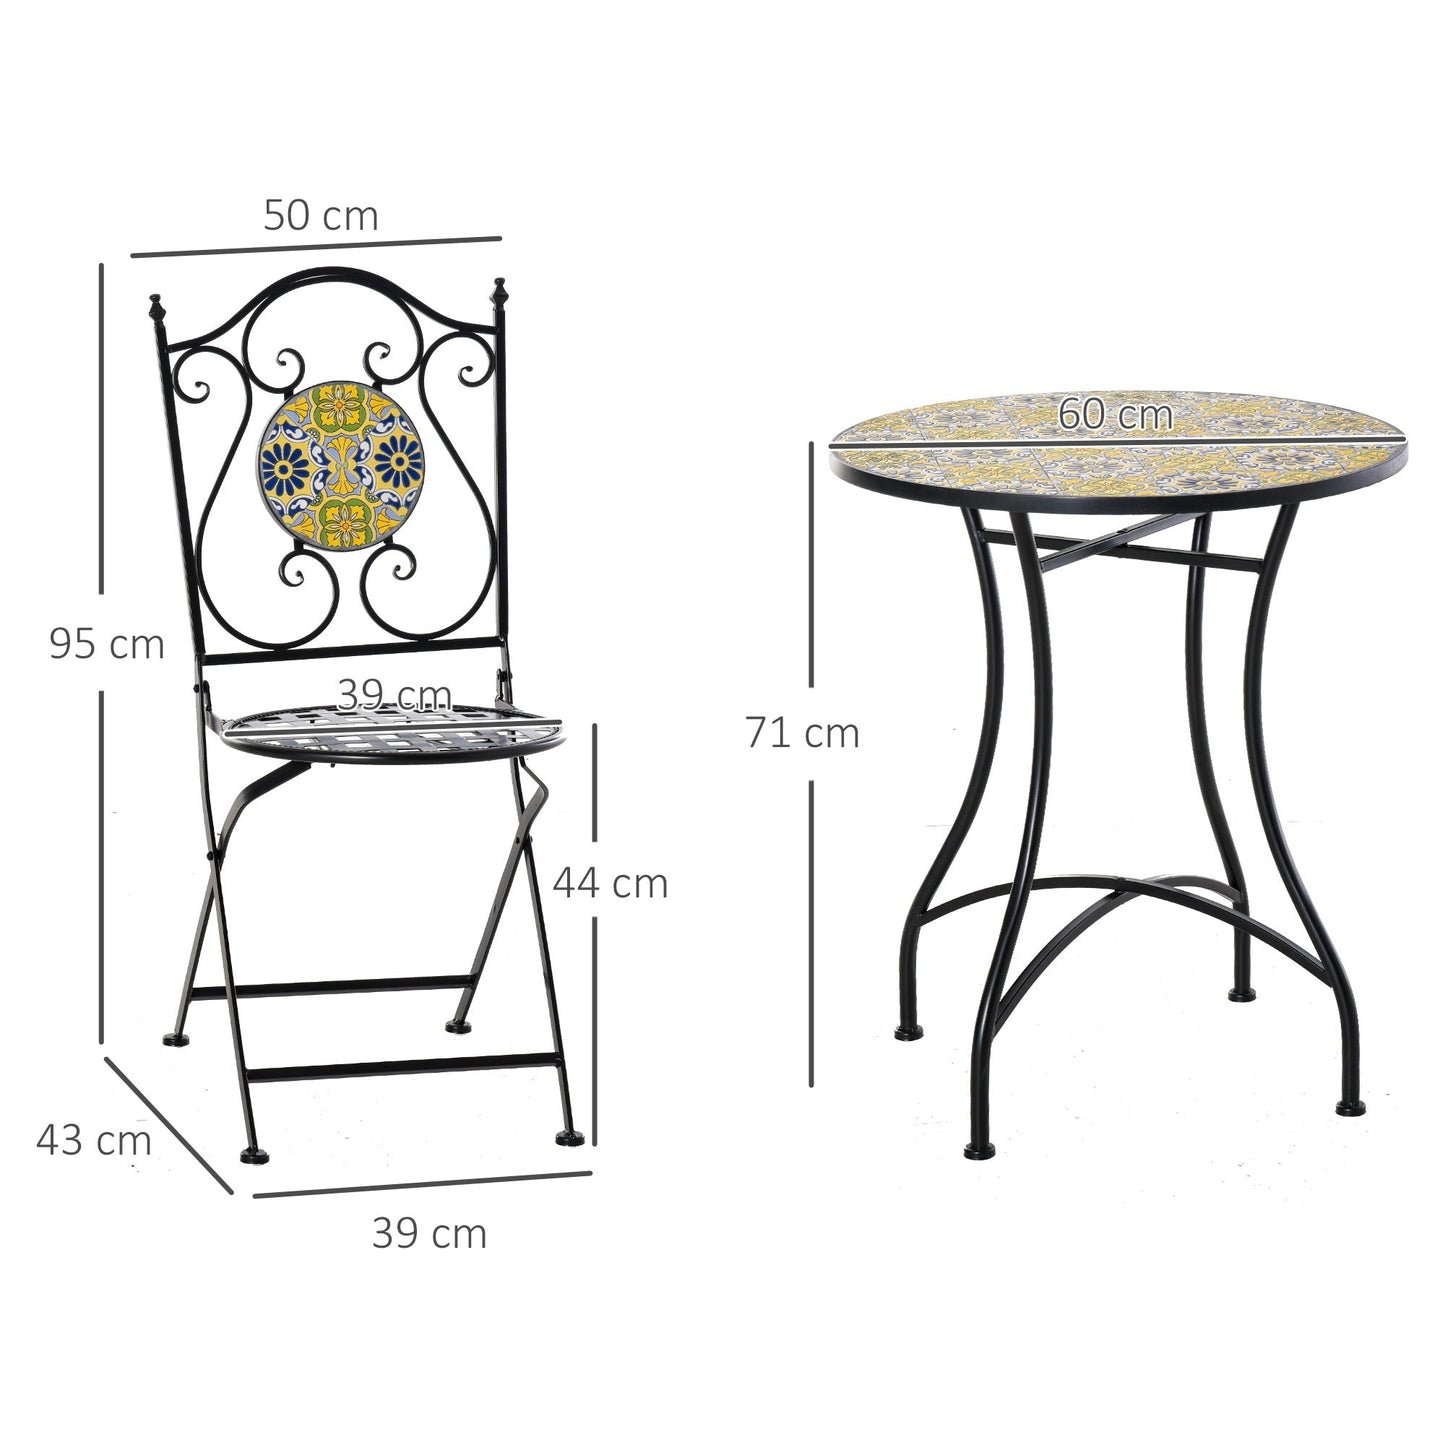 MAIOLICA | 3 Pcs Balcony Table and Chairs Set